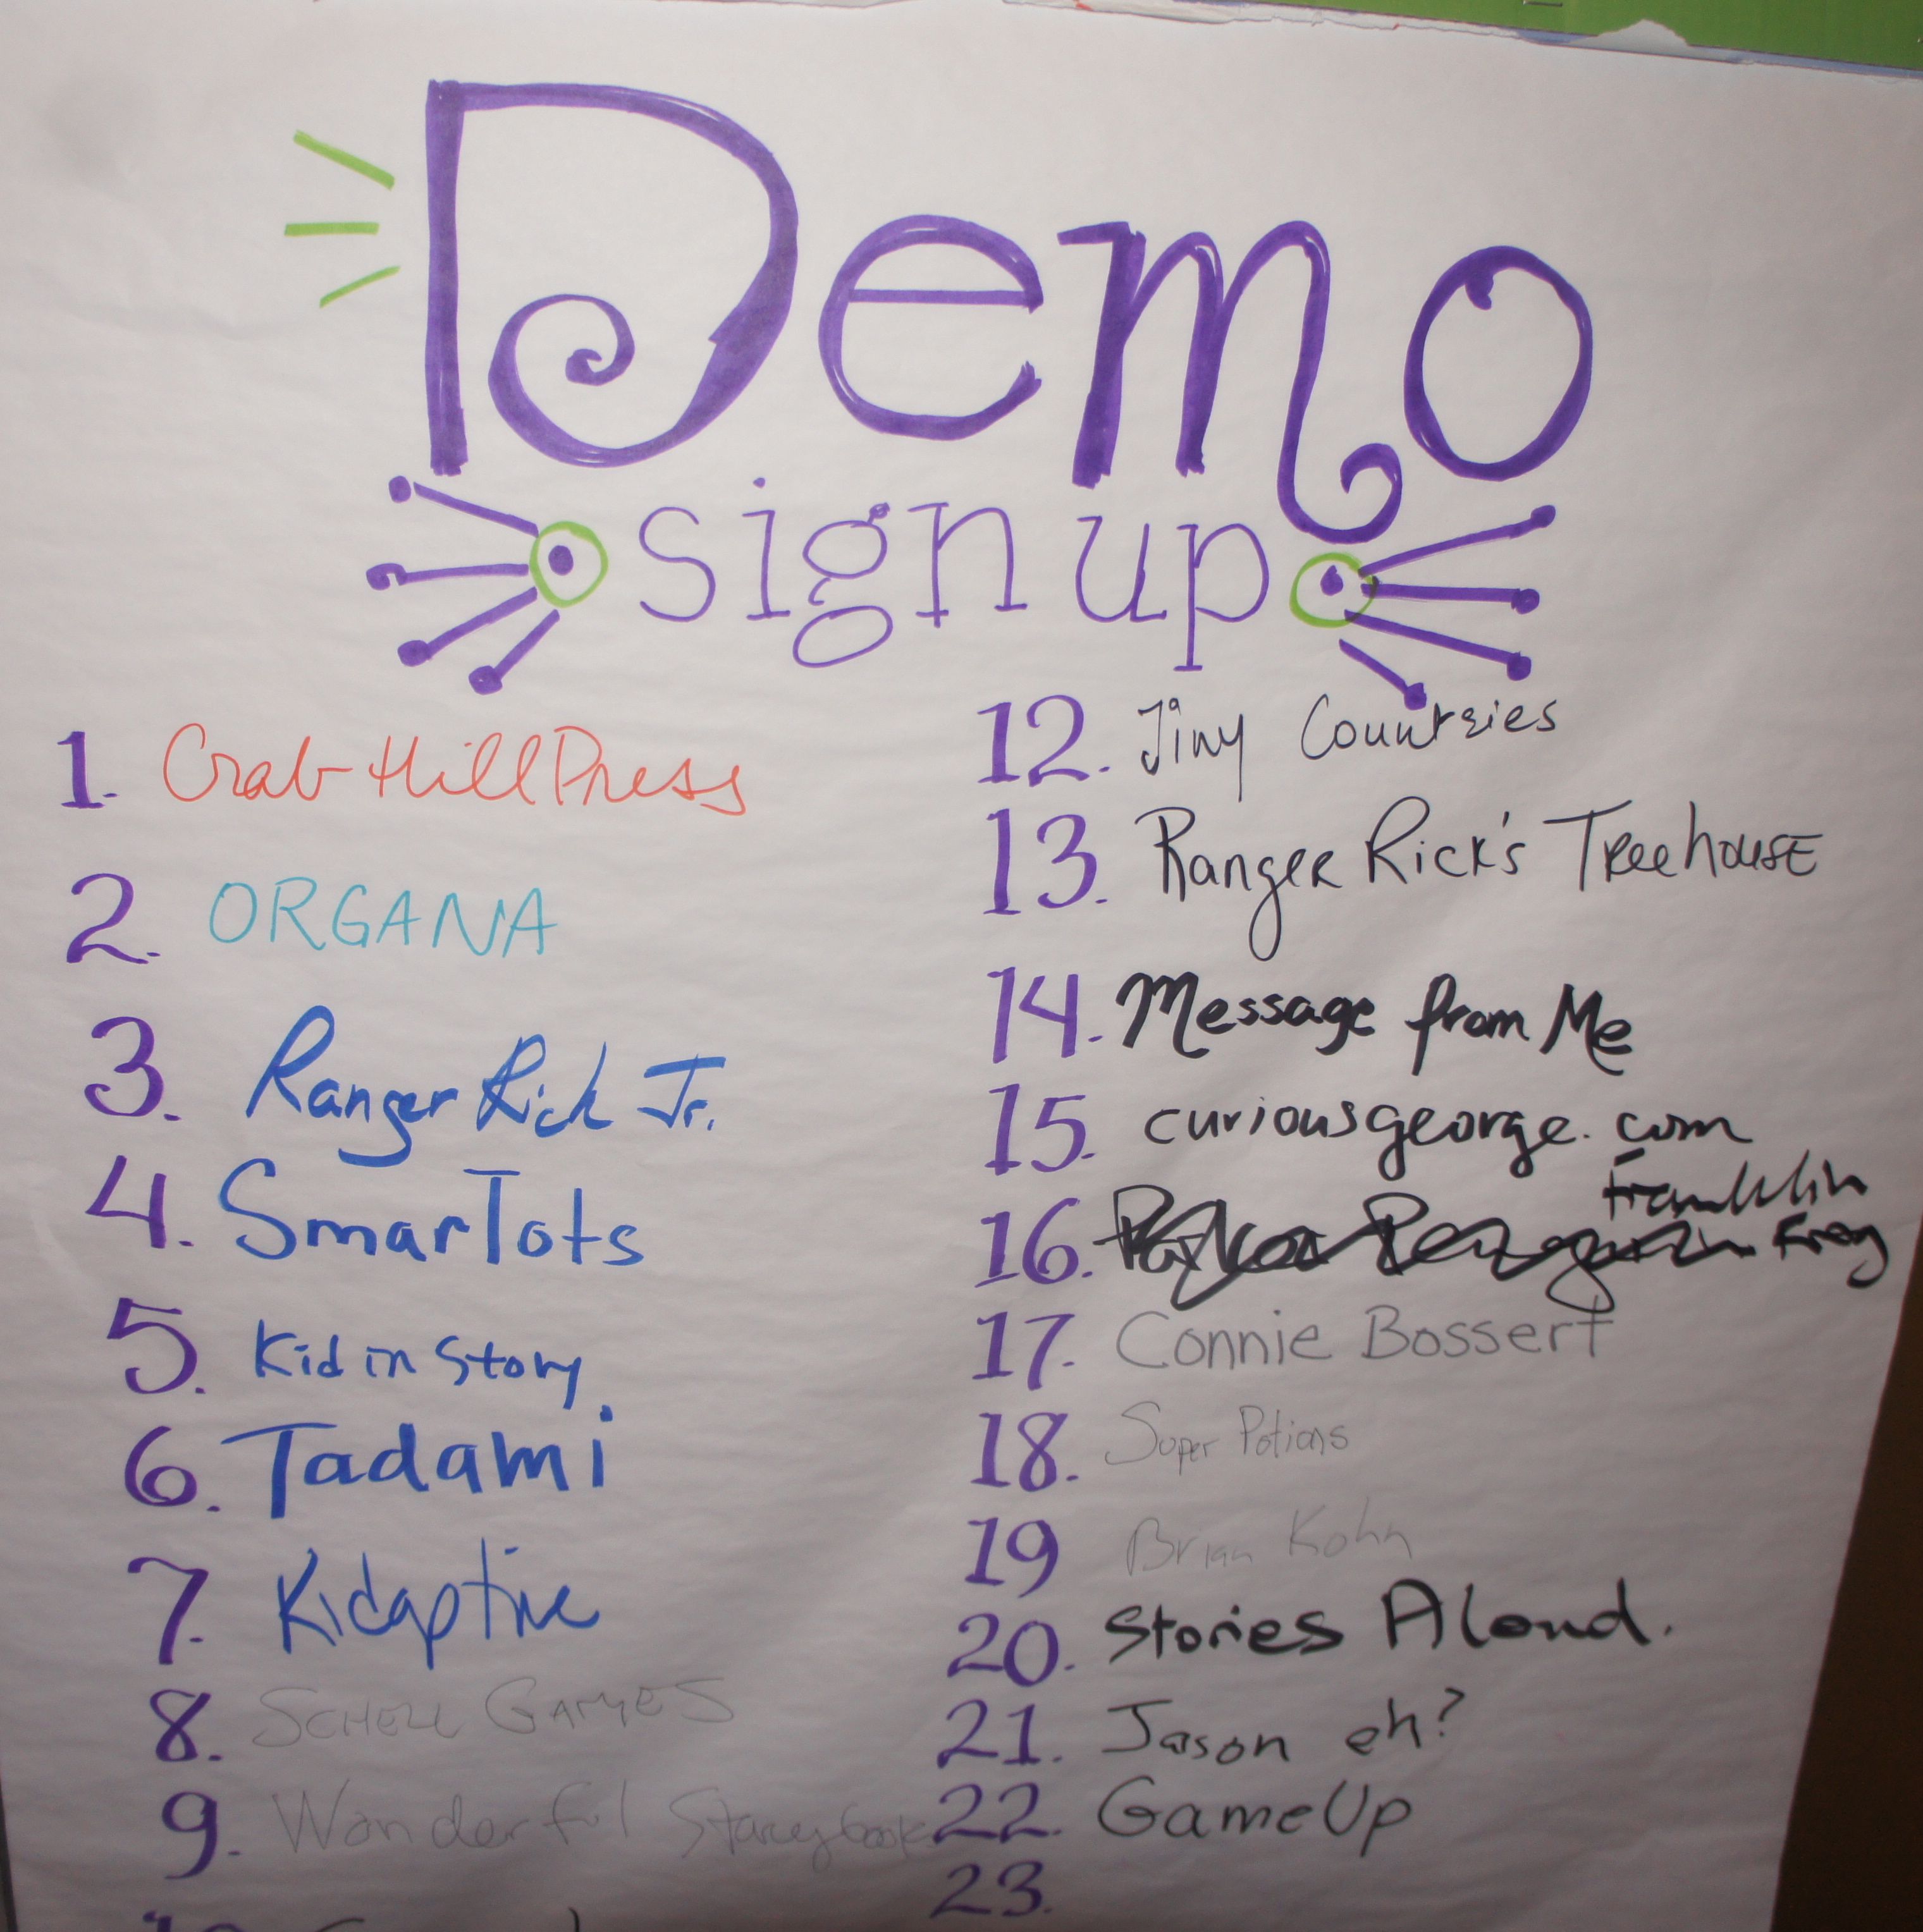 The Demo Board from DM 2012 Hurricane Edition